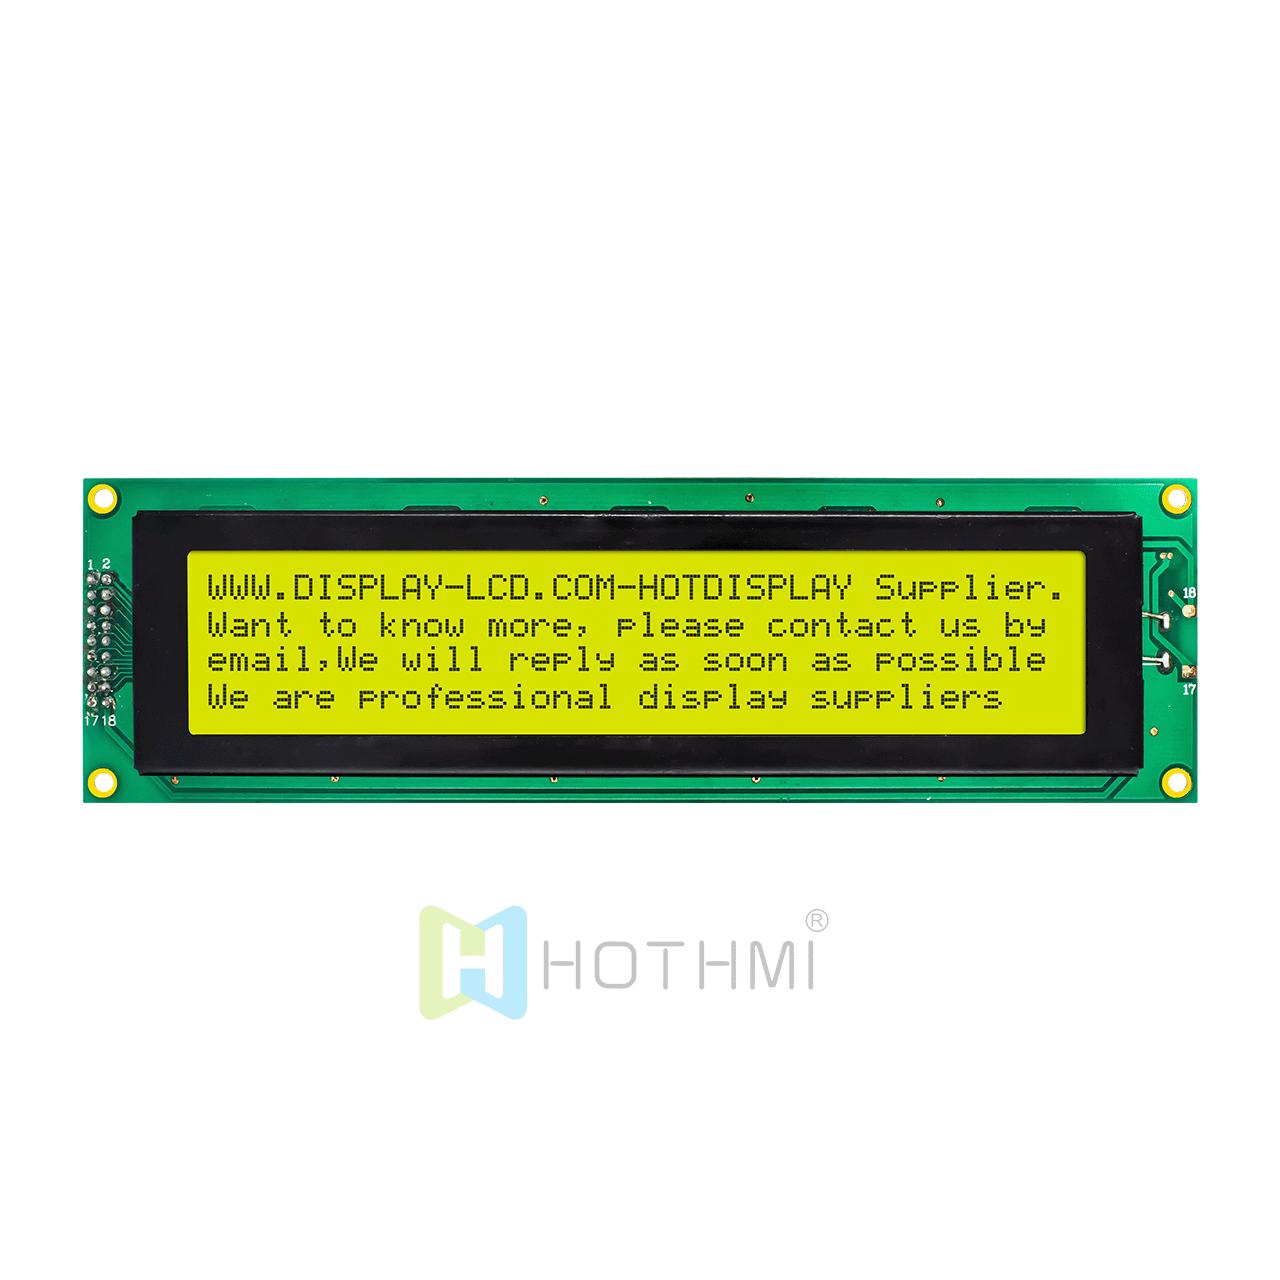 5.0v | 4X40 character monochrome LCD display module | STN positive display | with yellow-green backlight | Arduino display | ST7066U controller